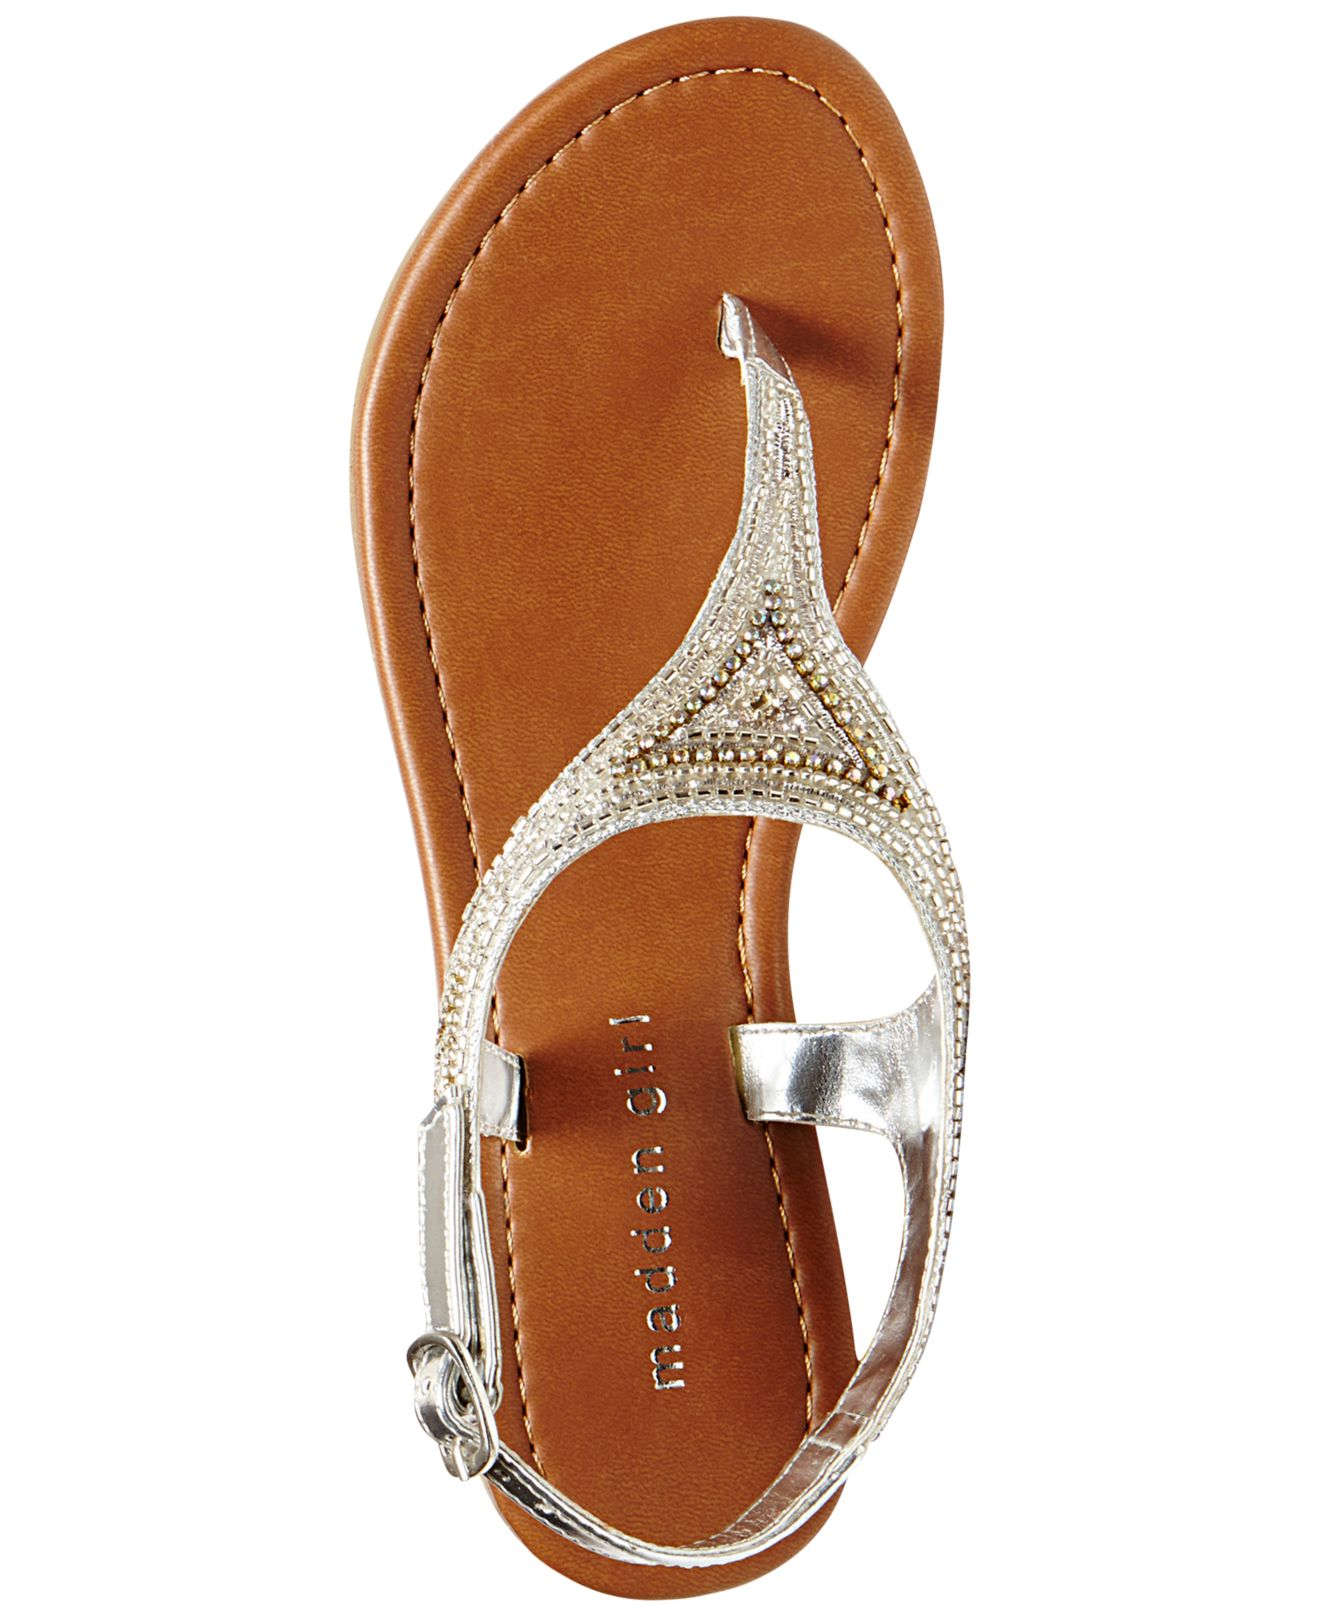 Lyst Madden Girl Riddlee Beaded Flat  Thong Sandals  in 